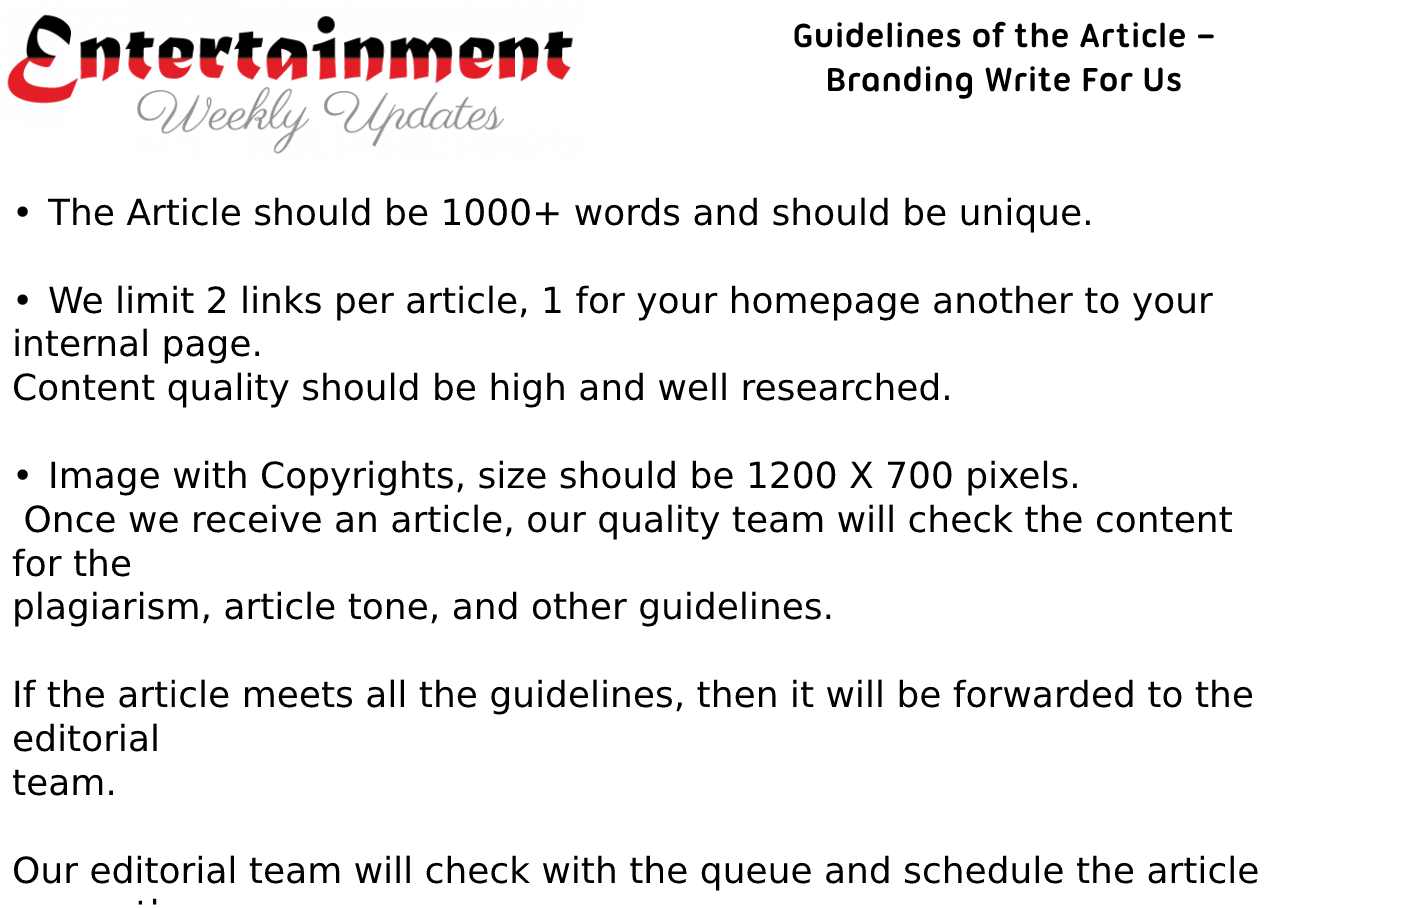 Guidelines of the Article – Branding Write For Us